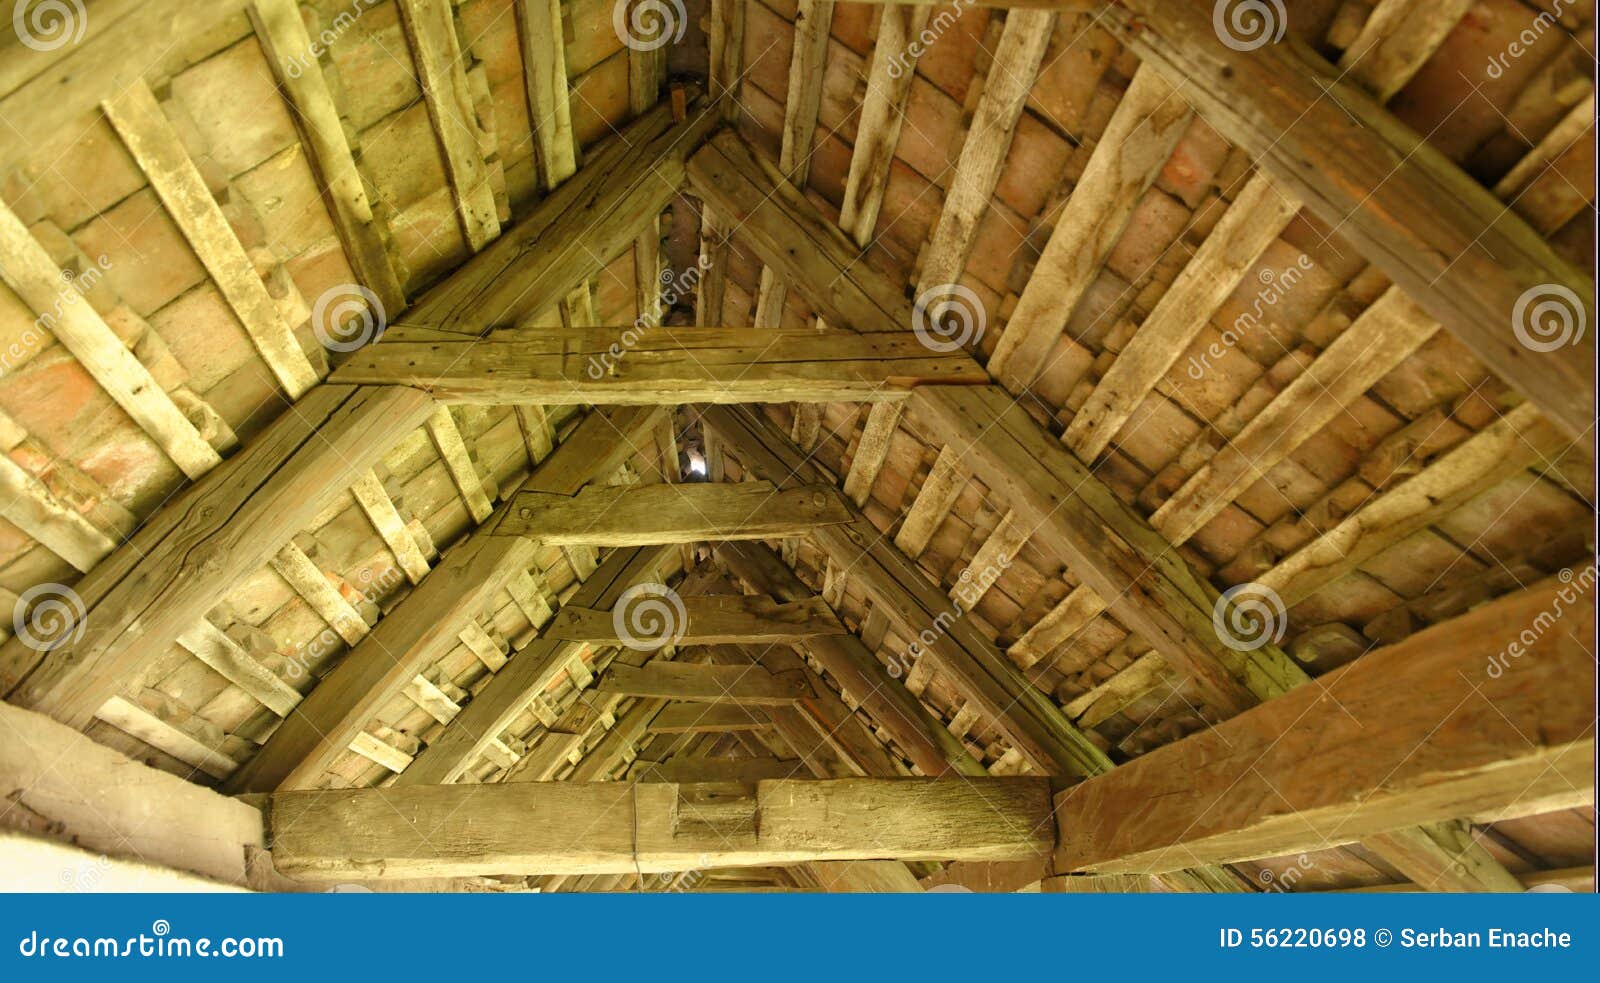 Vaulted Wood Ceiling Of Fortified Church Romania Stock